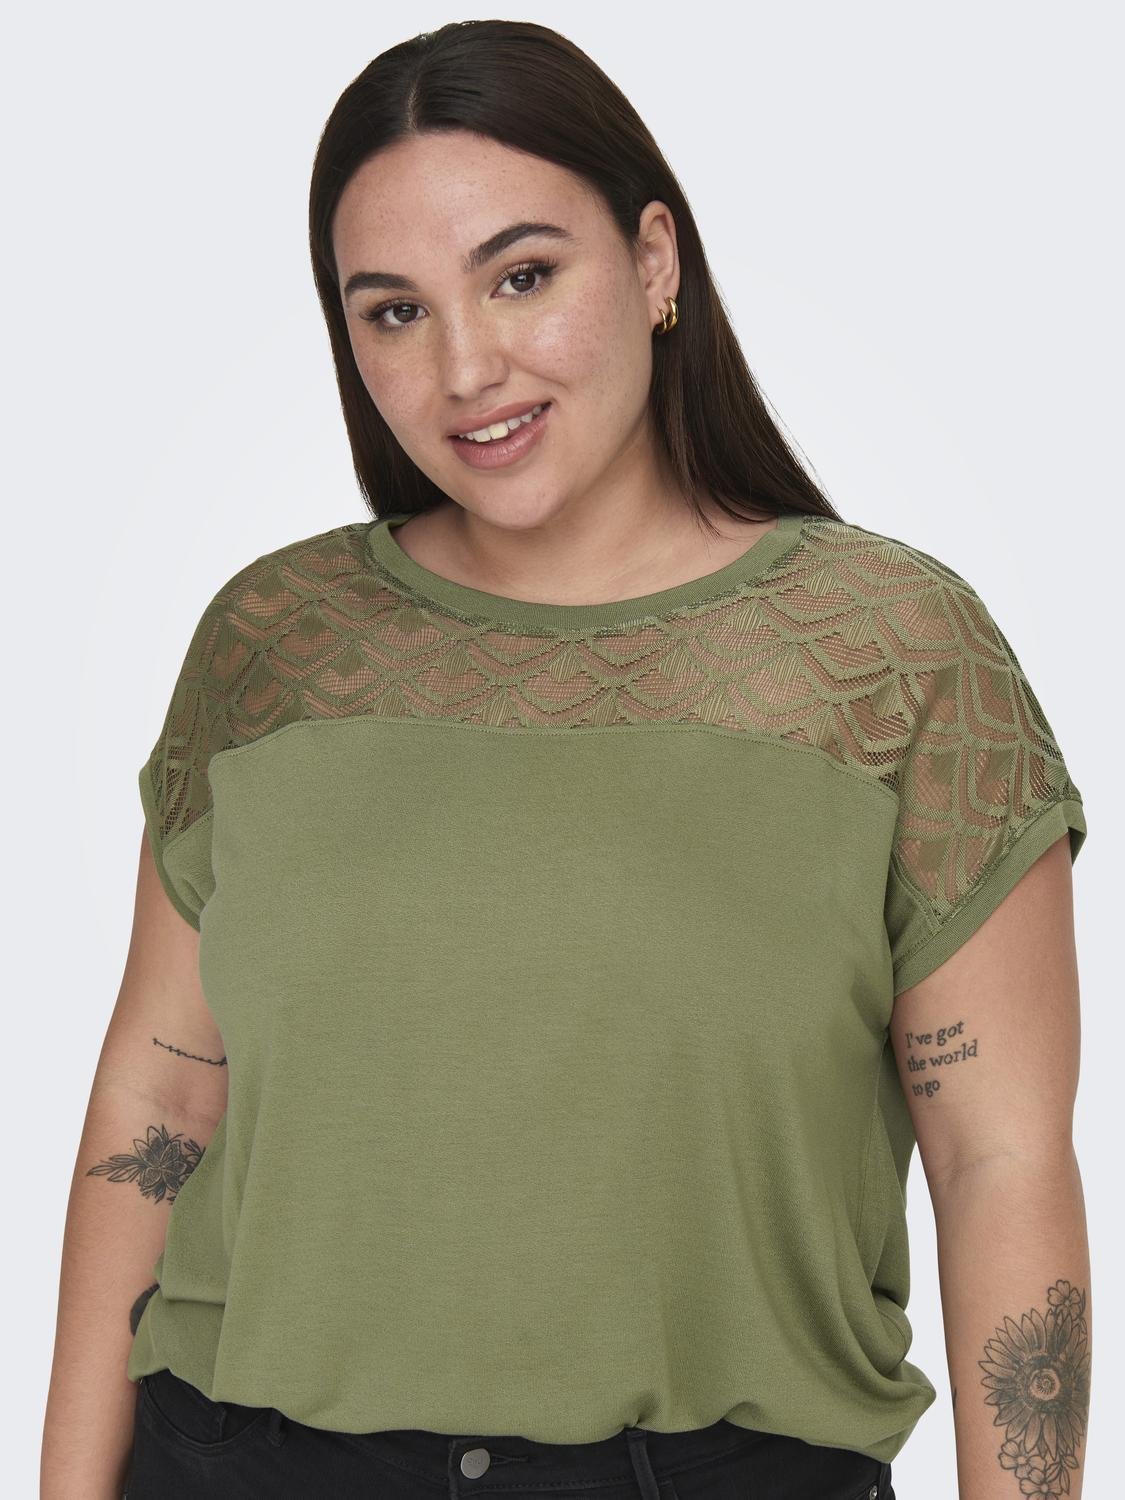 ONLY Curvy lace detail Top -Aloe - 15197908